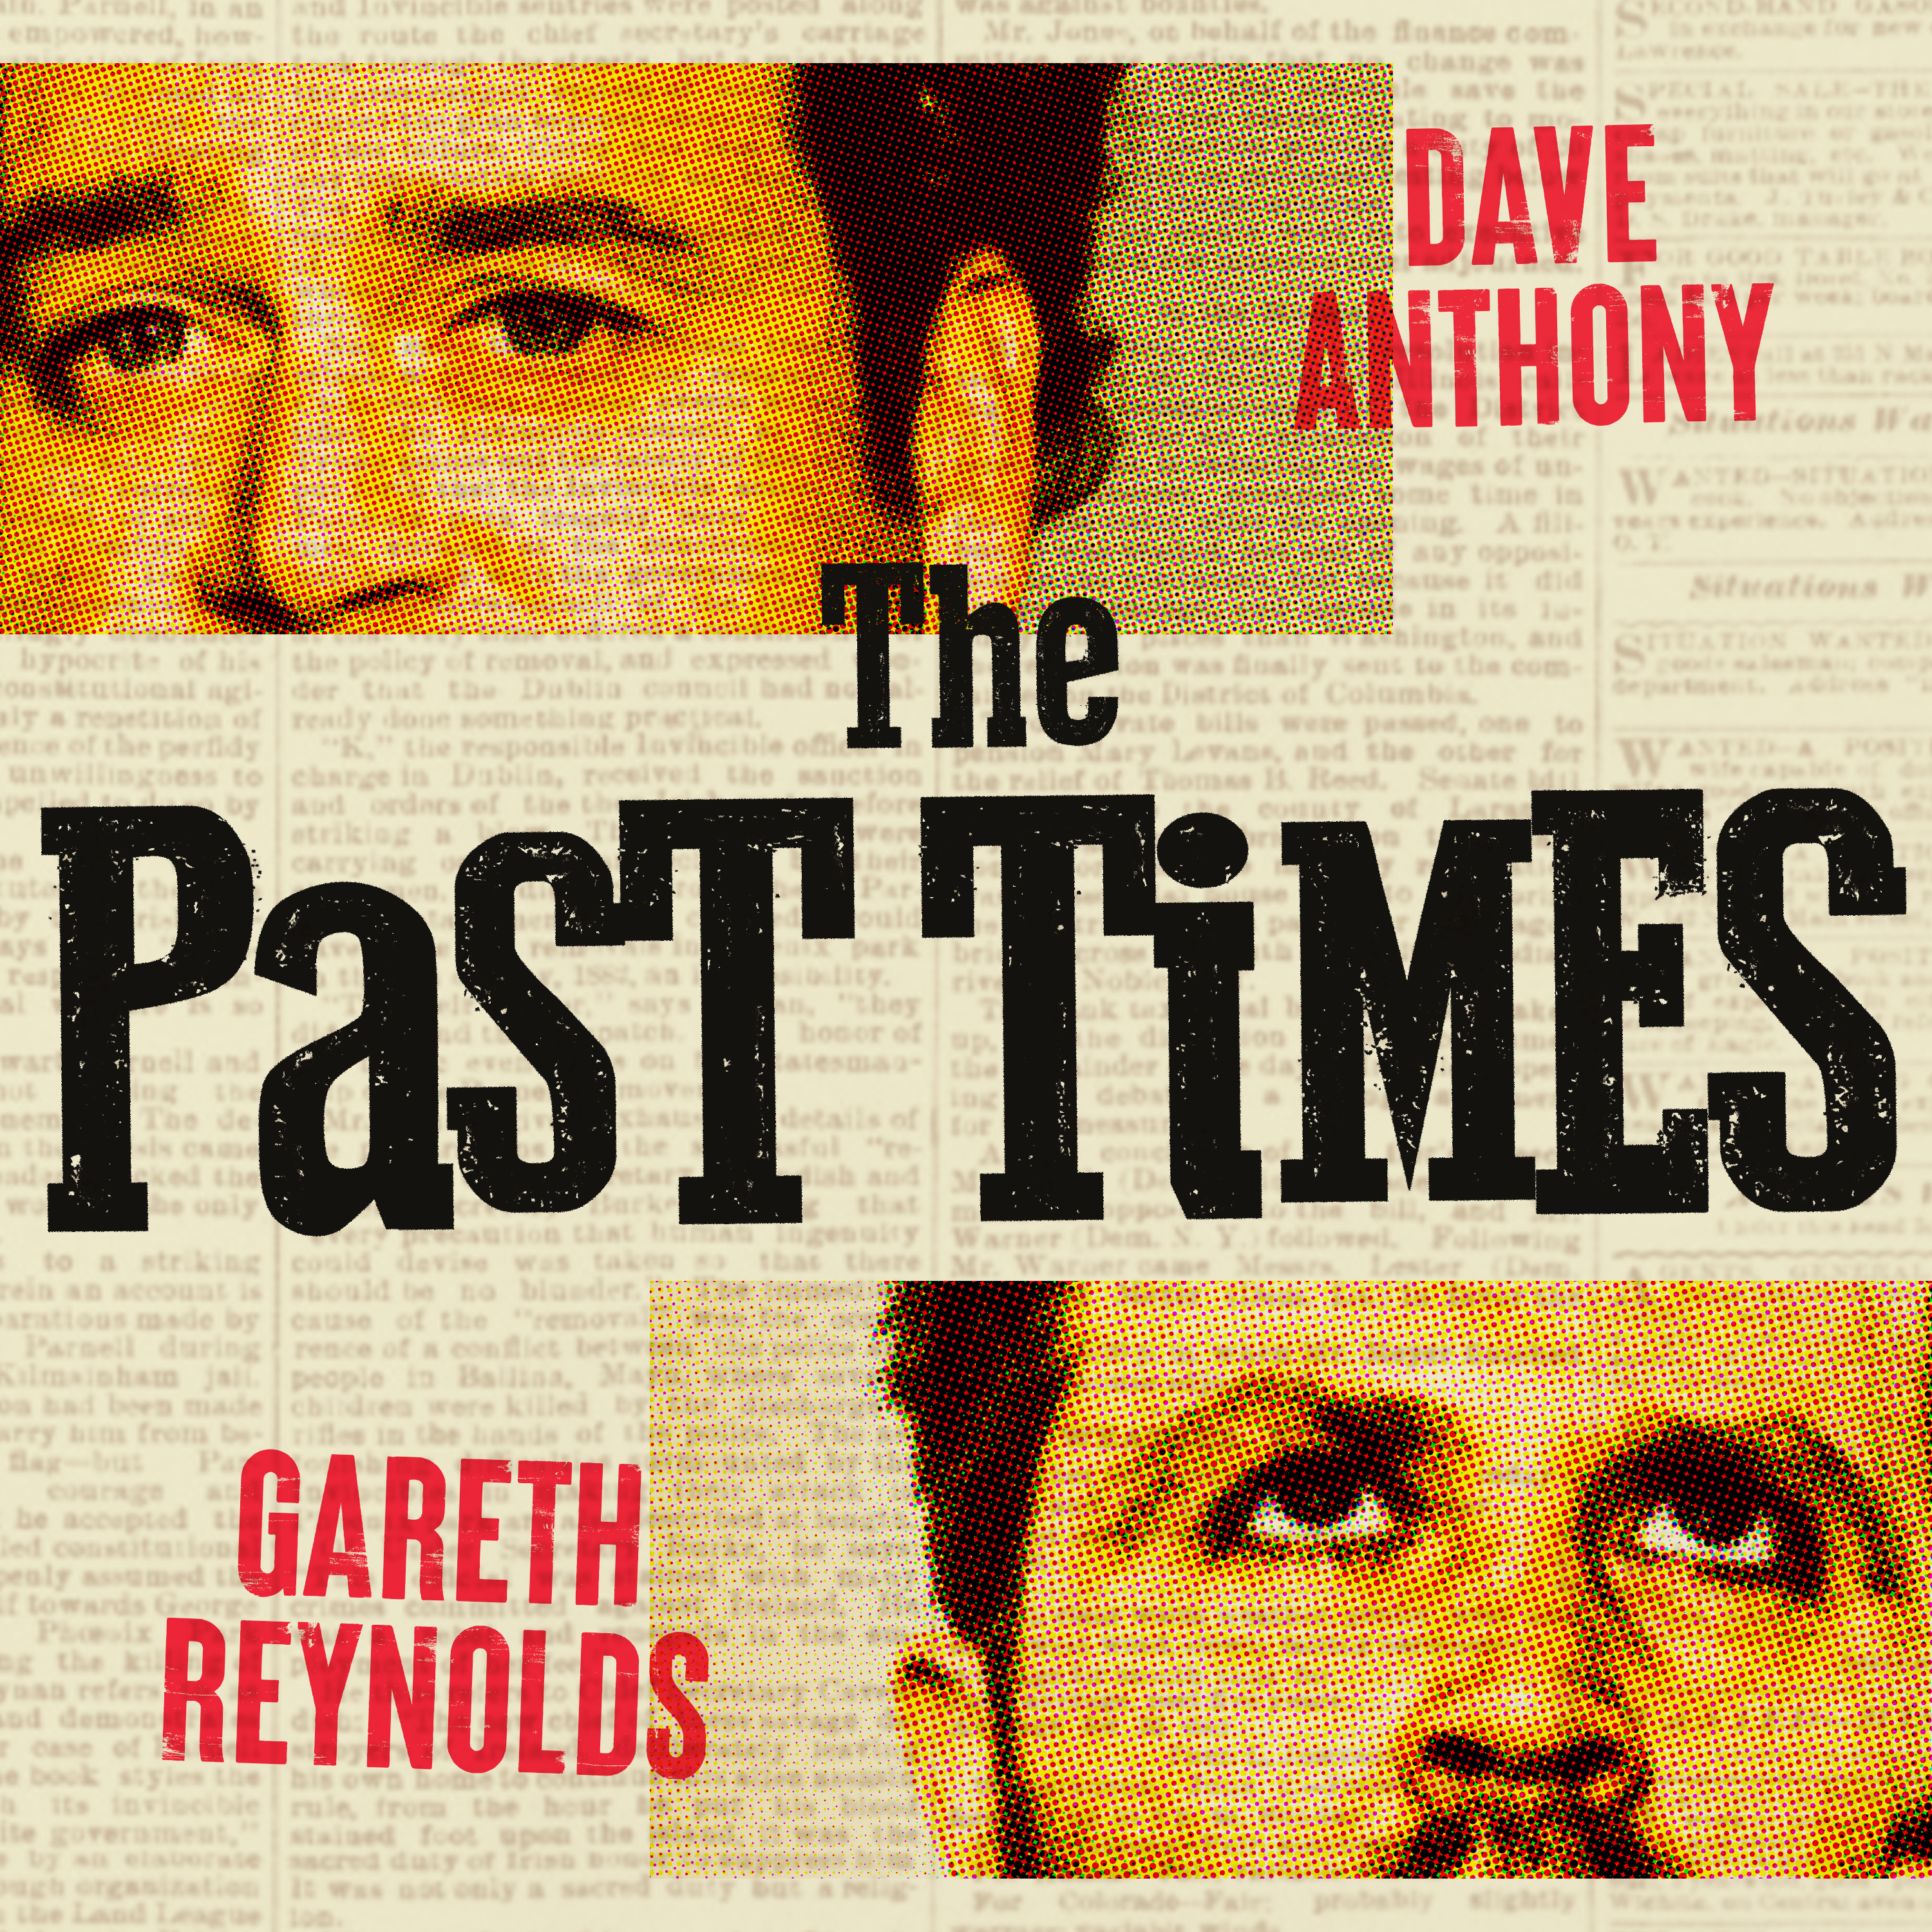 7 - Tim Harford: The Past Times